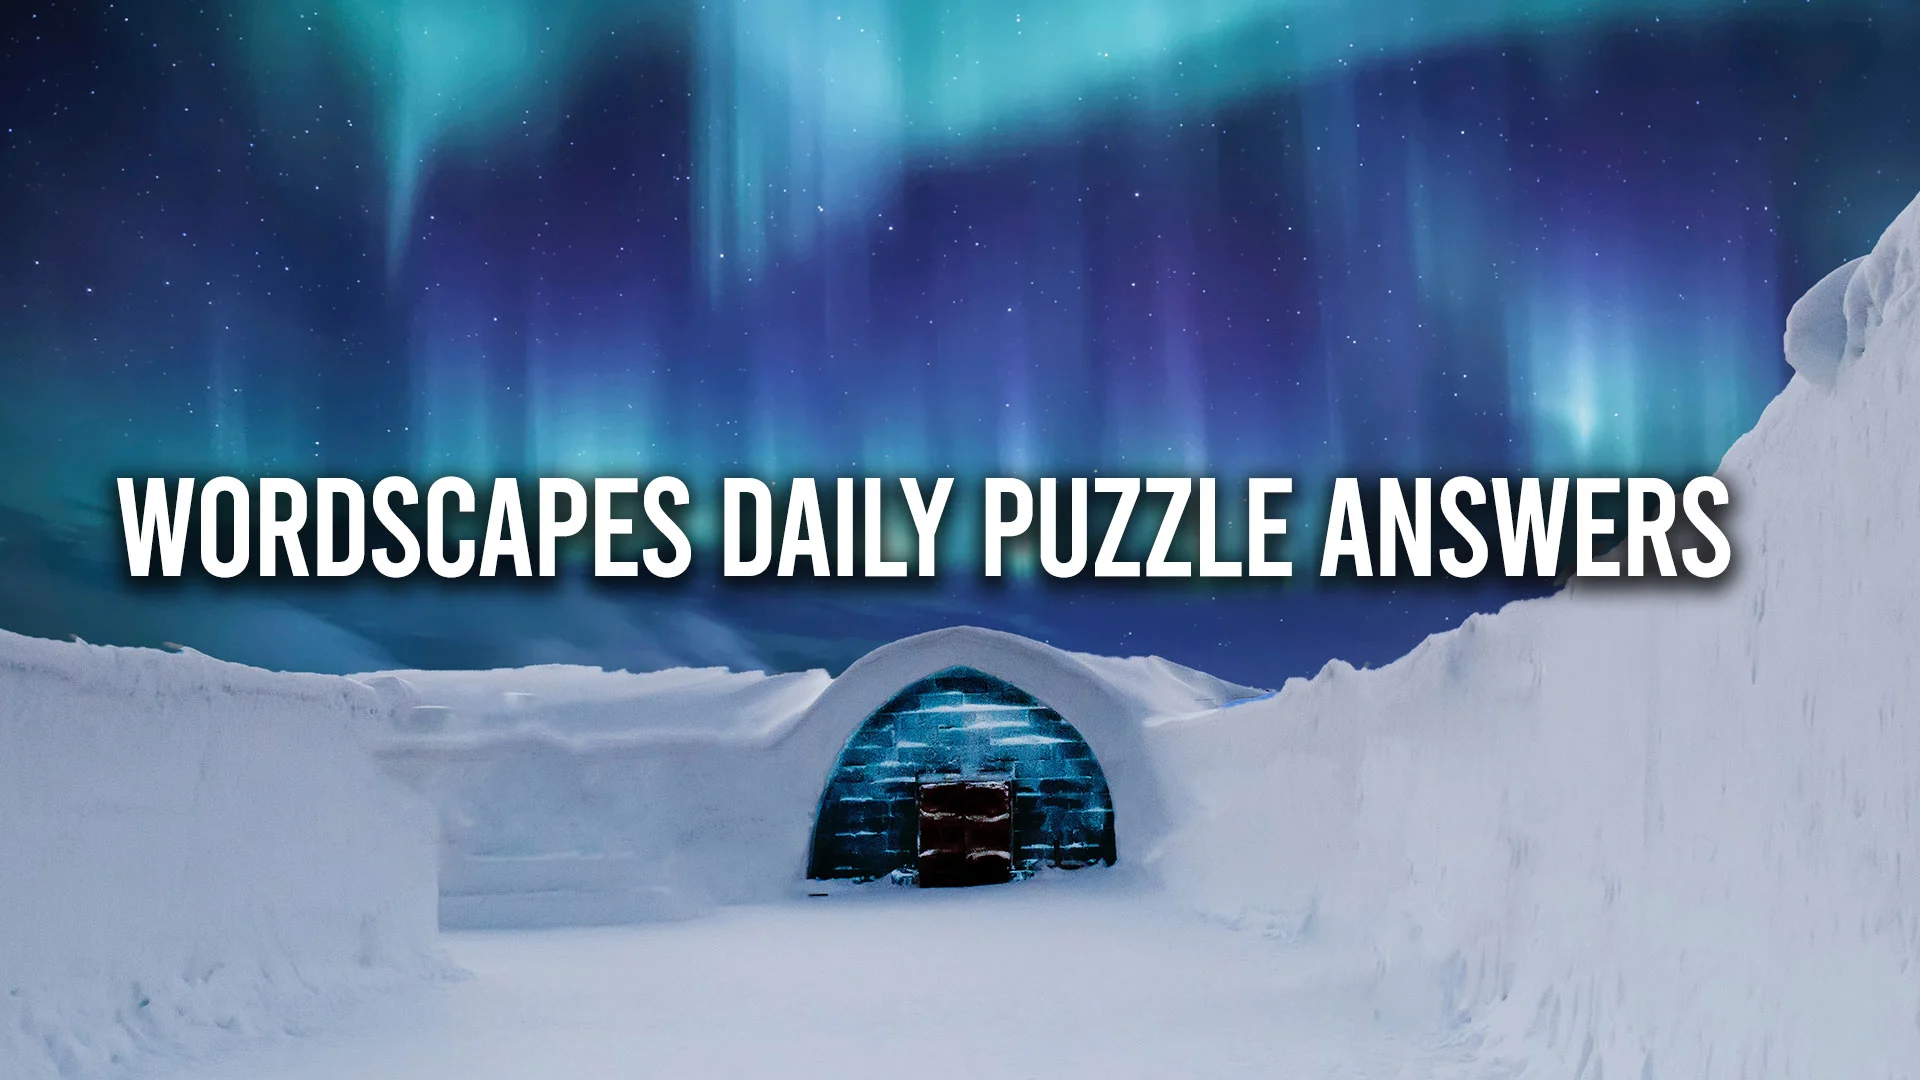 Wordscapes Daily Puzzle Answers for January 27 2023